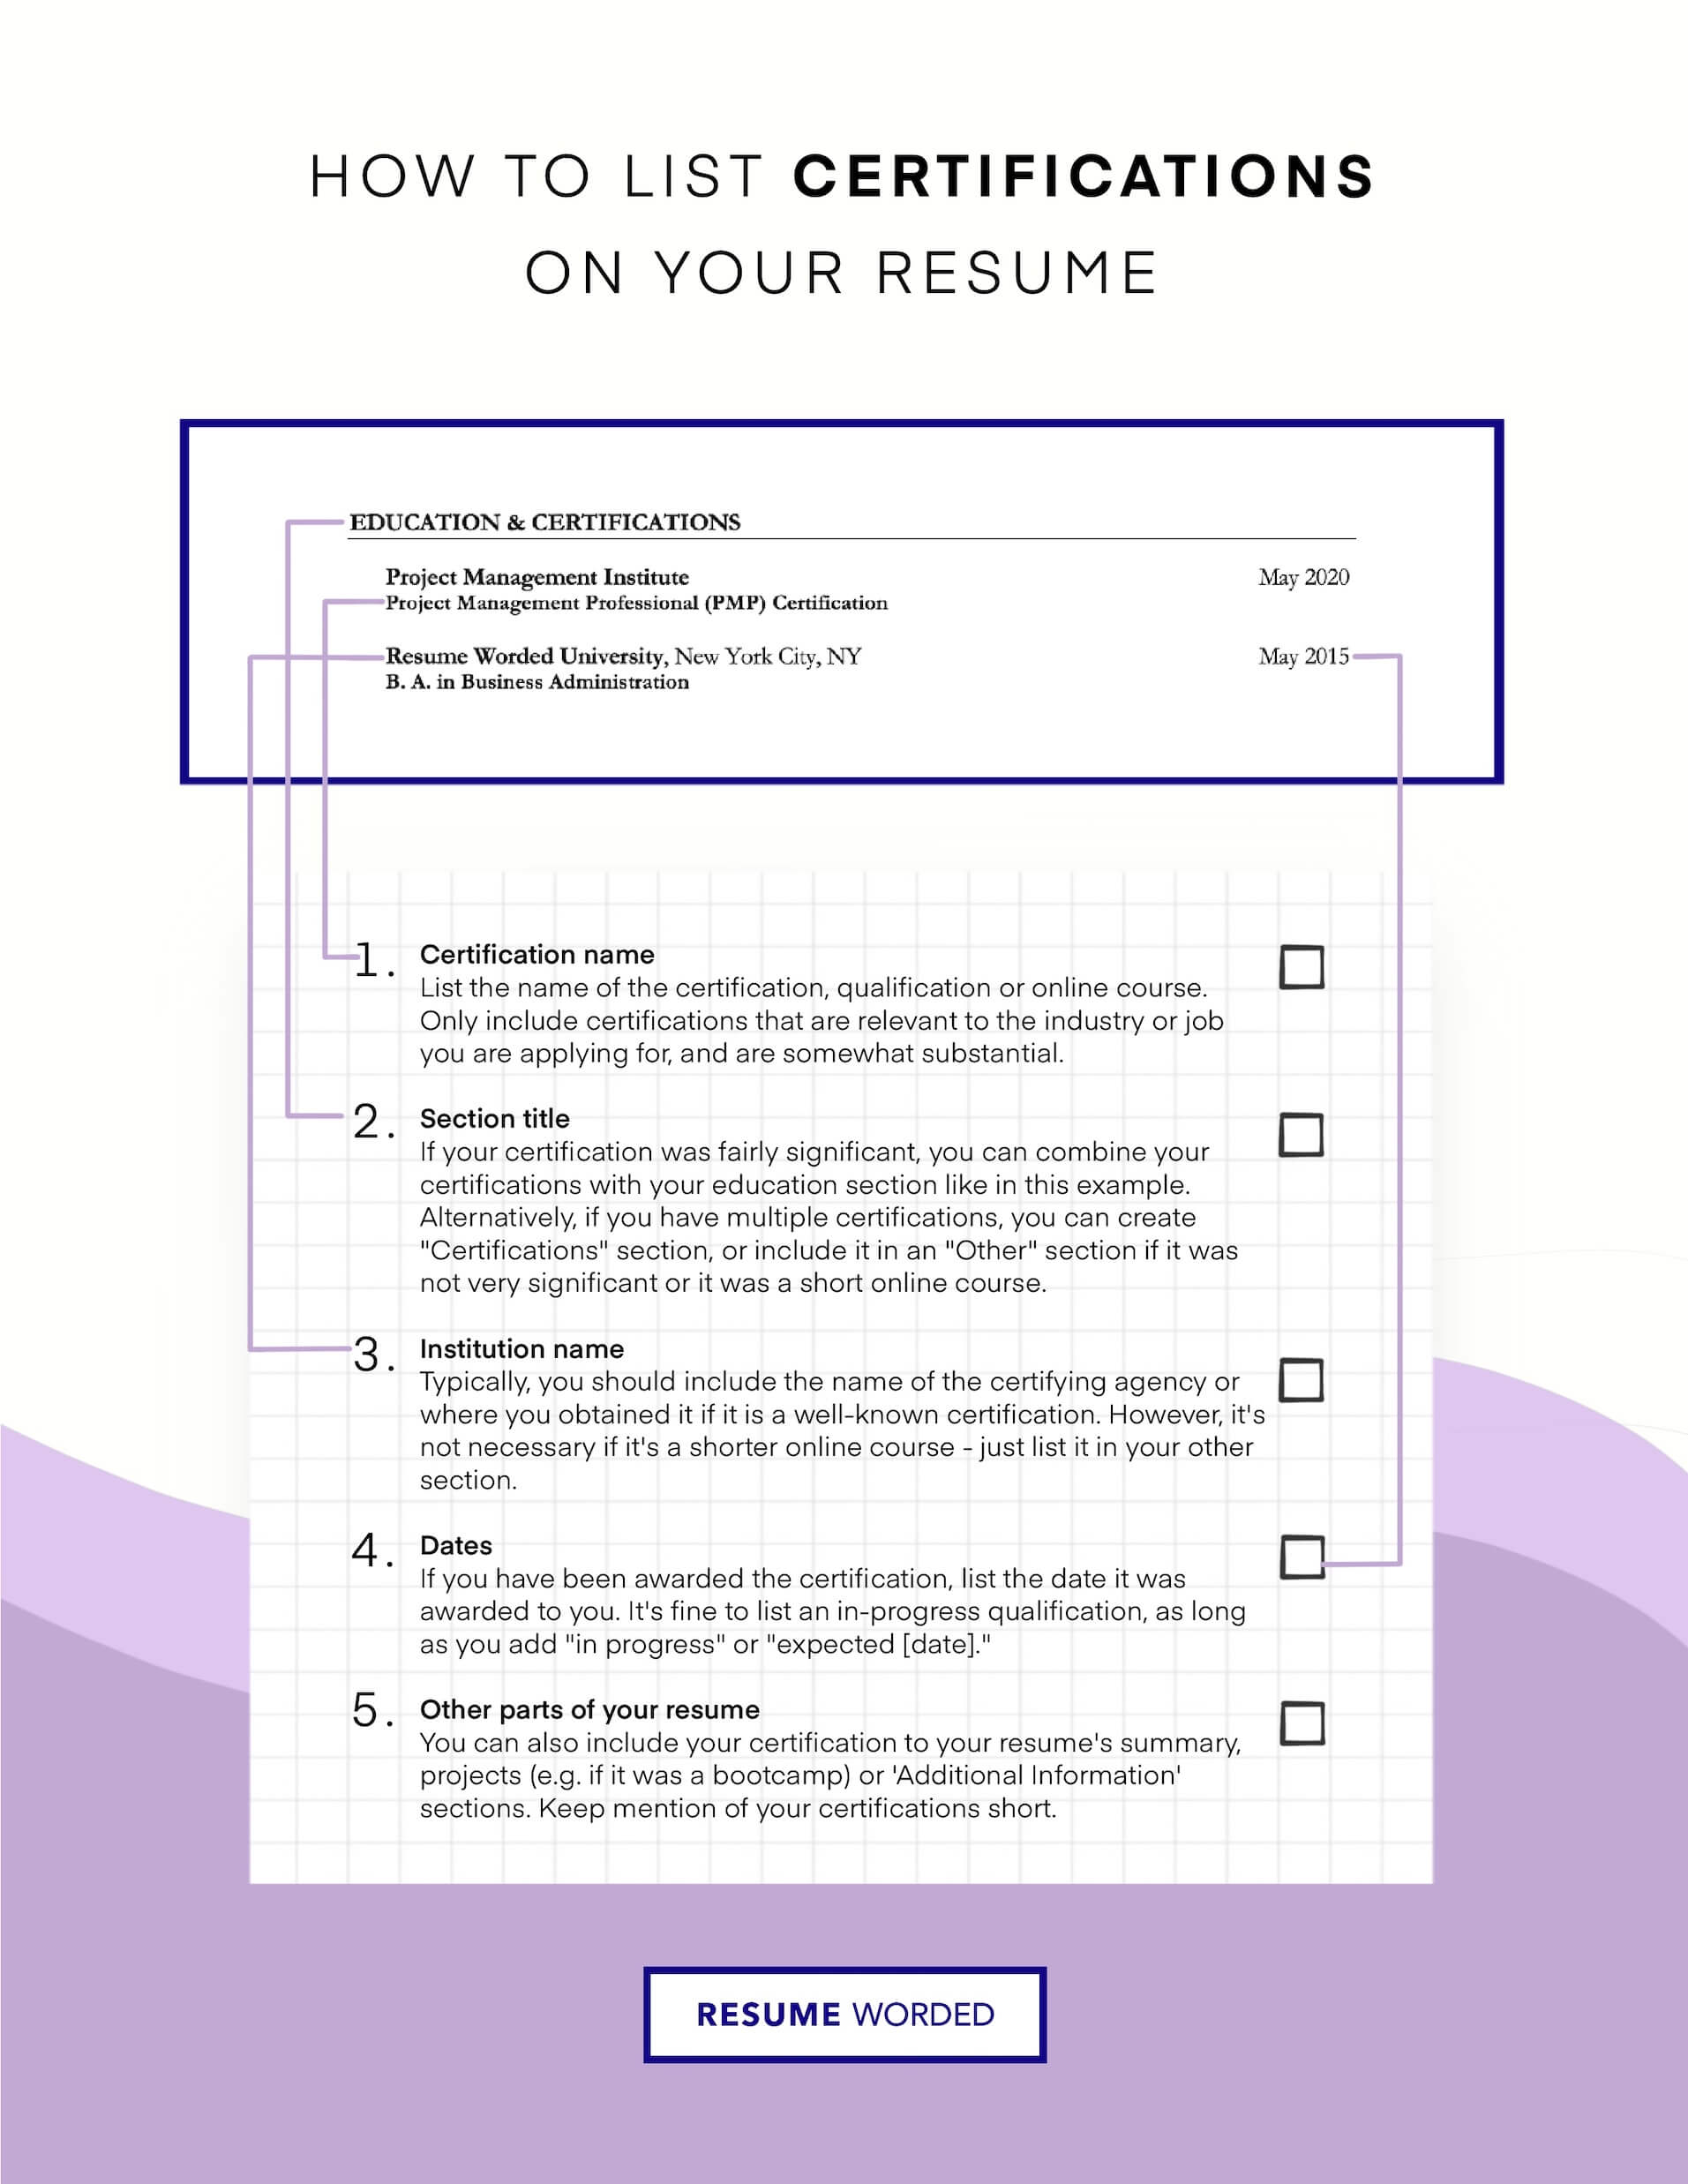 Ensure you have the required licenses and certifications. - Plant Operator Resume